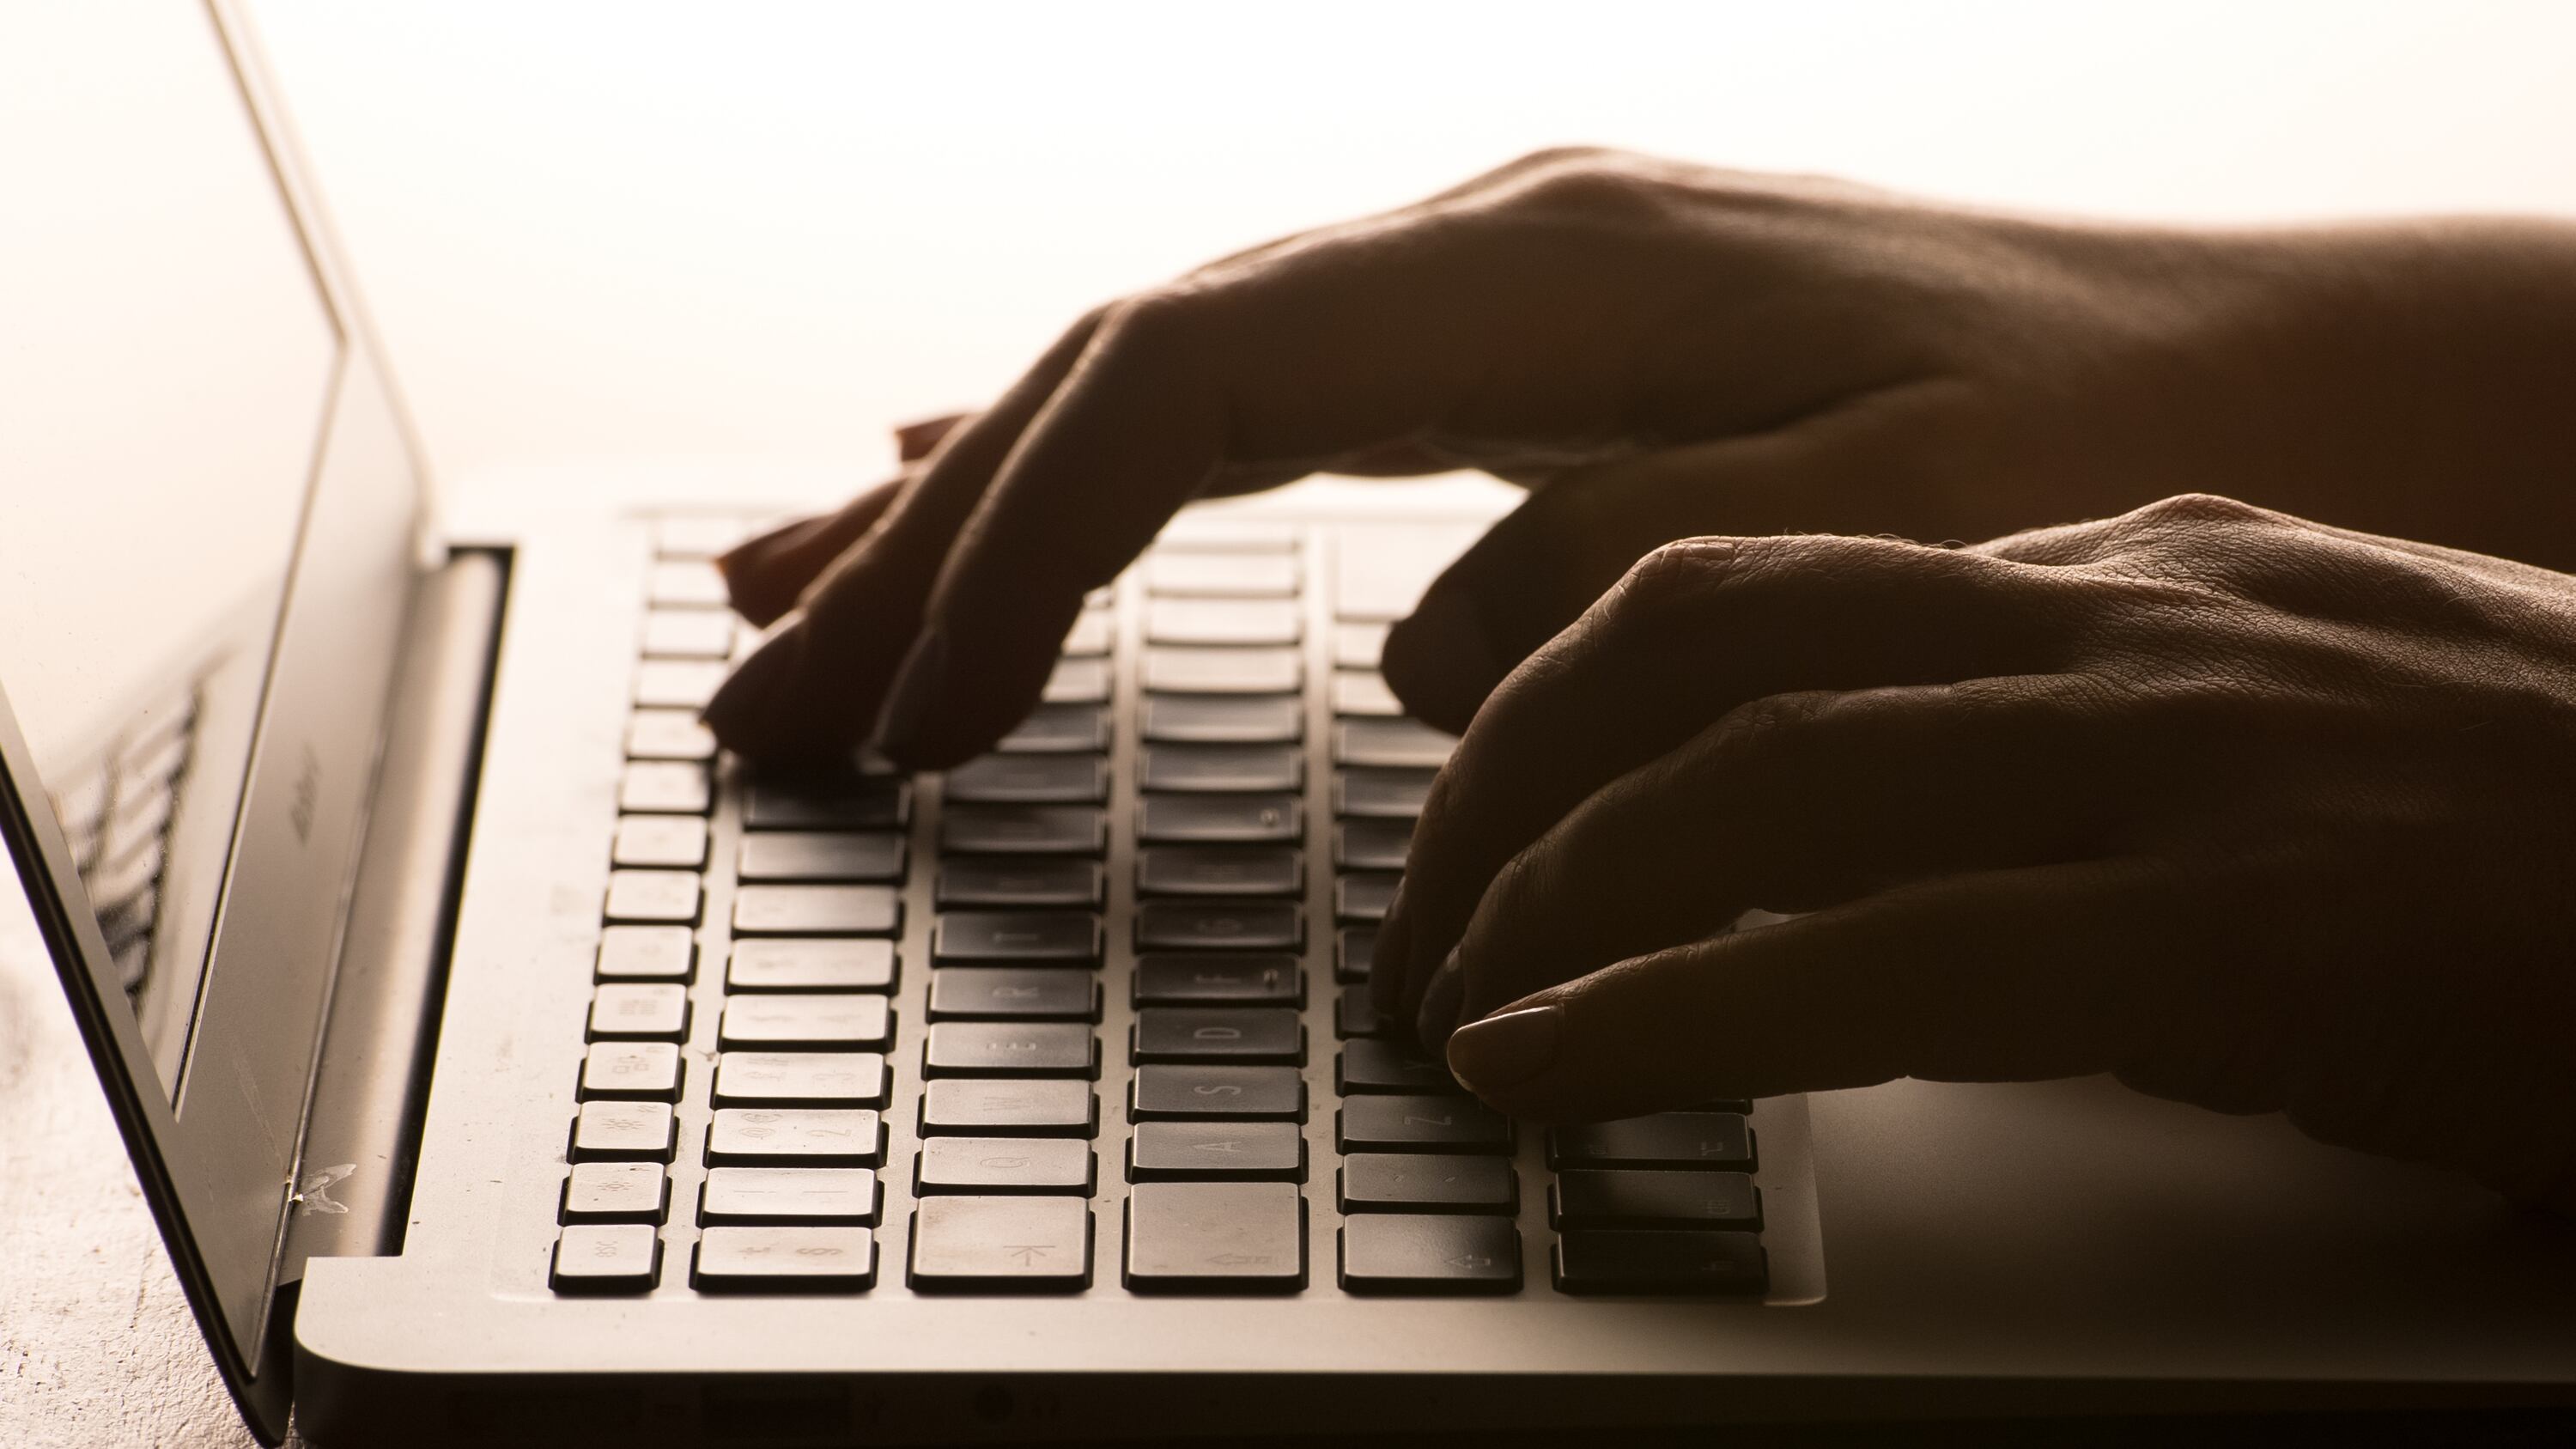 Information Commissioner’s Office has published advice around common cyber security mistakes